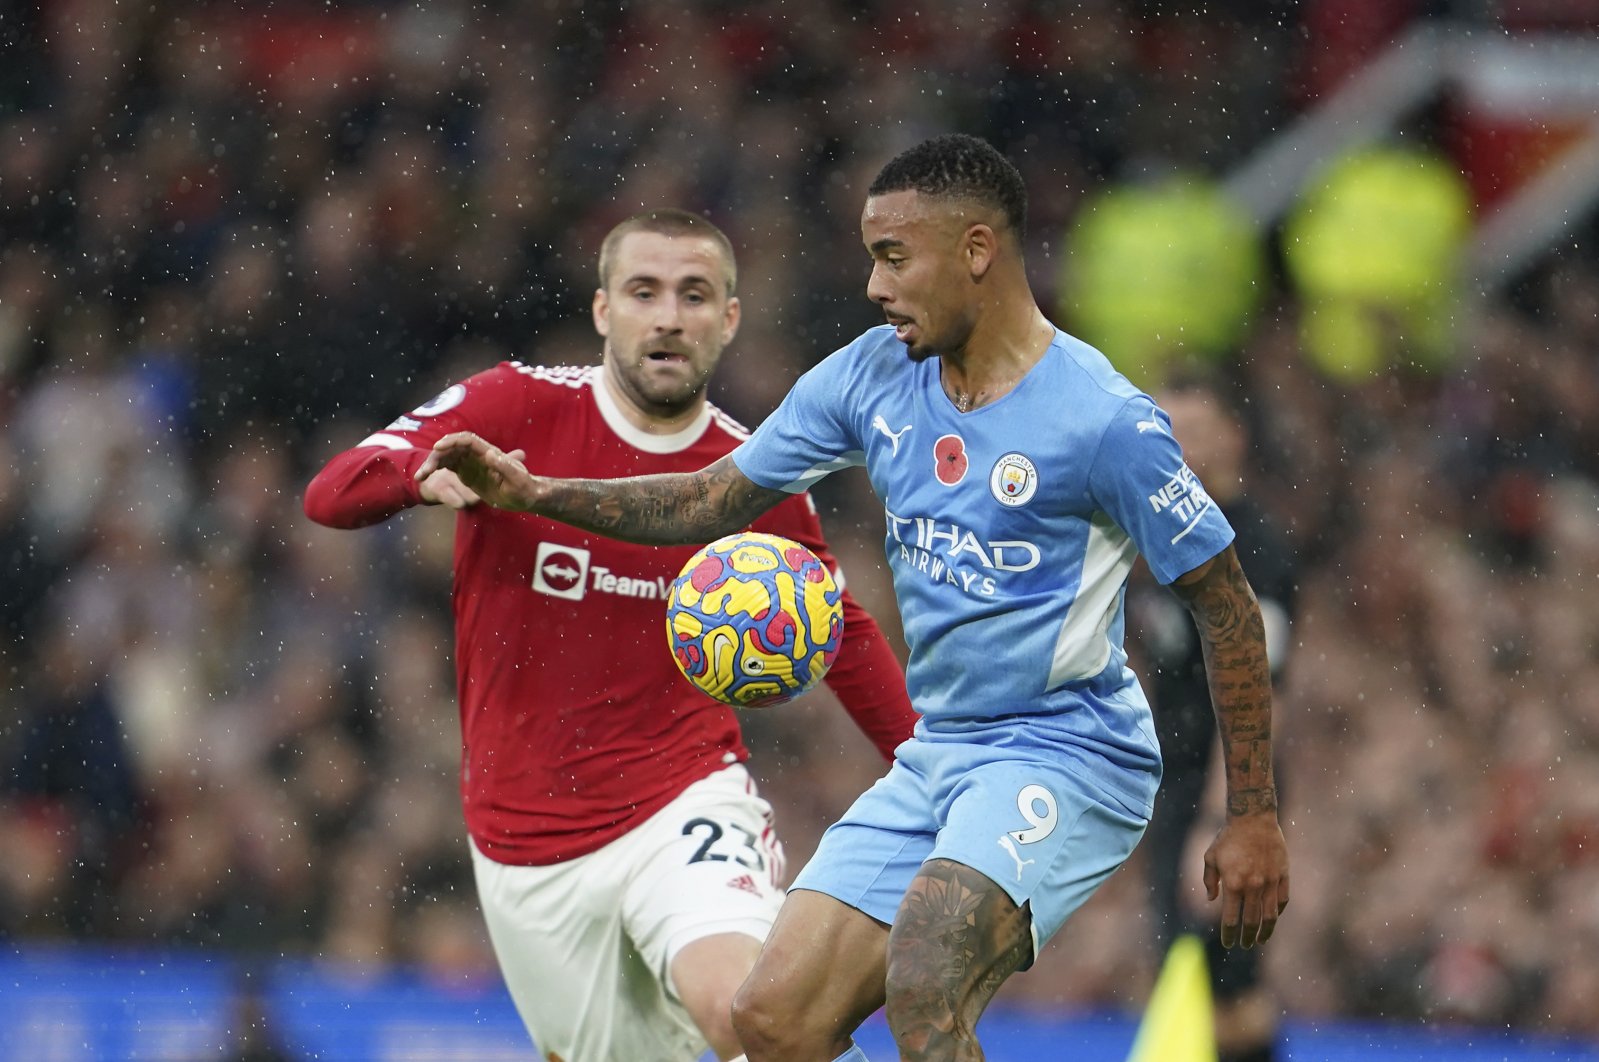 Manchester City&#039;s Gabriel Jesus (R) vies with Manchester United&#039;s Luke Shaw during a Premier League match, Manchester, England, Nov. 6, 2021. (AP Photo)